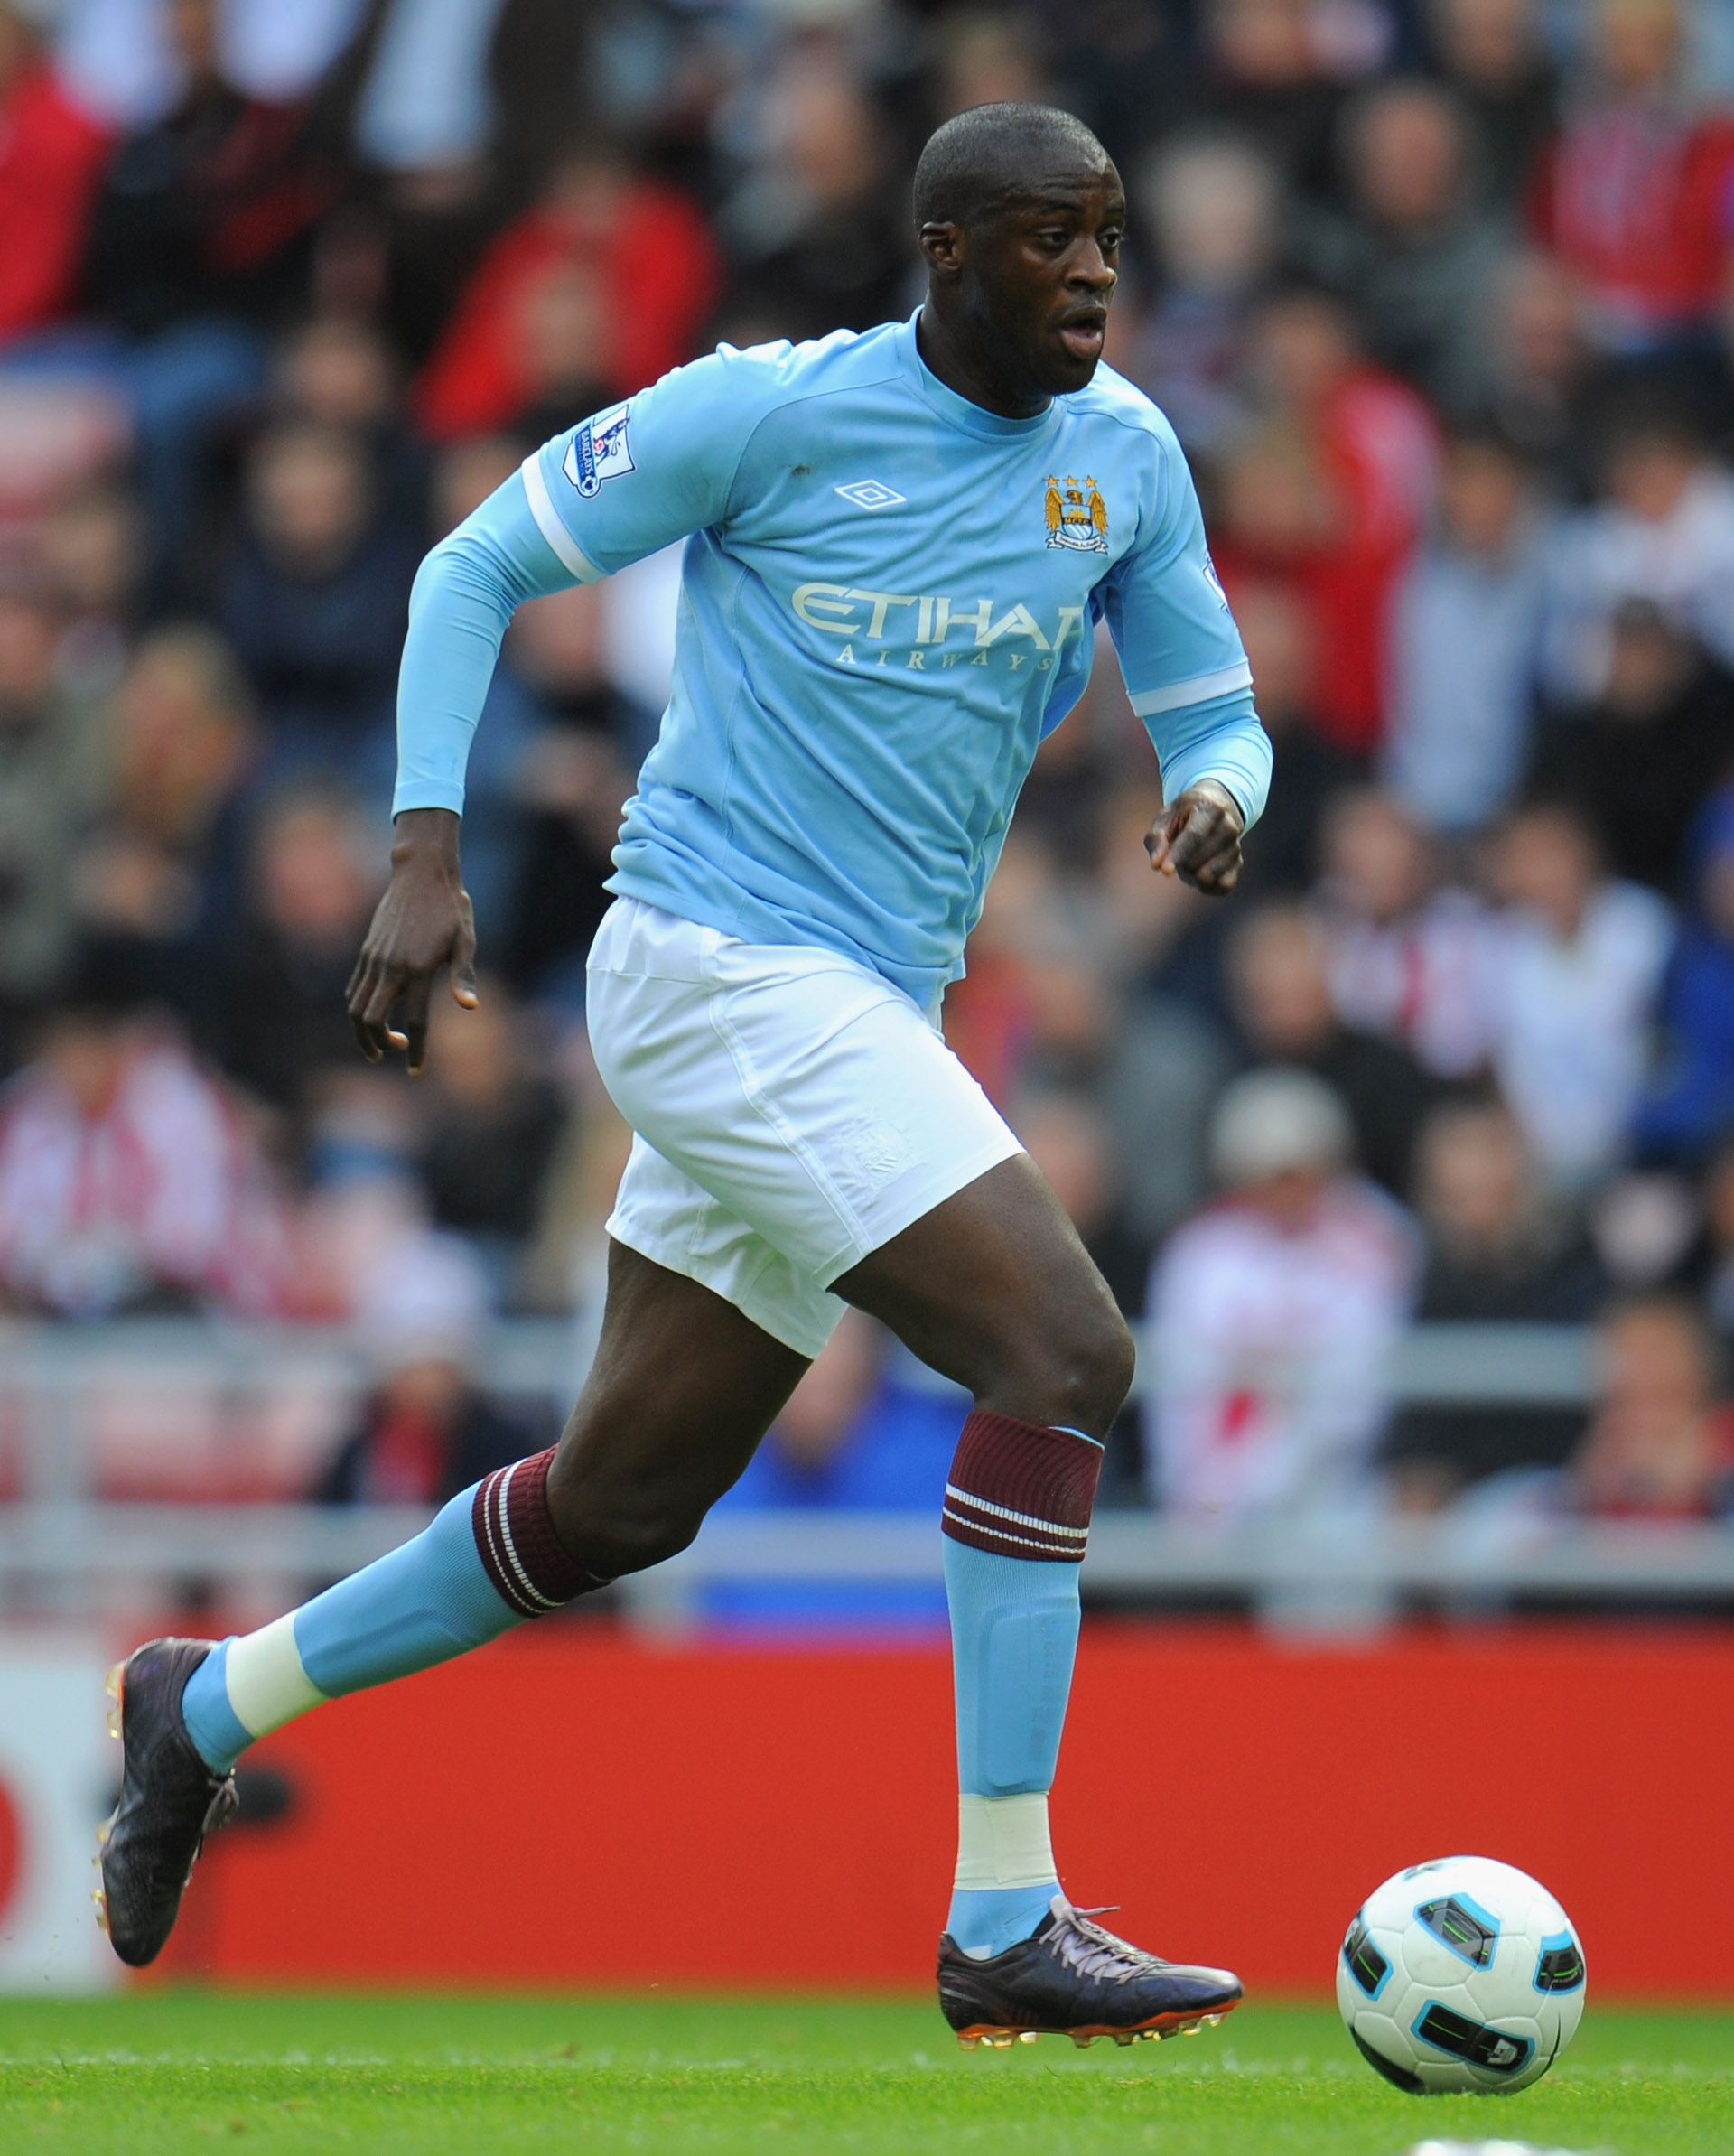 SUNDERLAND, ENGLAND - AUGUST 29:  Yaya Toure of Manchester City on the ball during the Barclays Premier League match between Sunderland and Manchester City at the Stadium of Light on August 29, 2010 in Sunderland, England.  (Photo by Michael Regan/Getty I